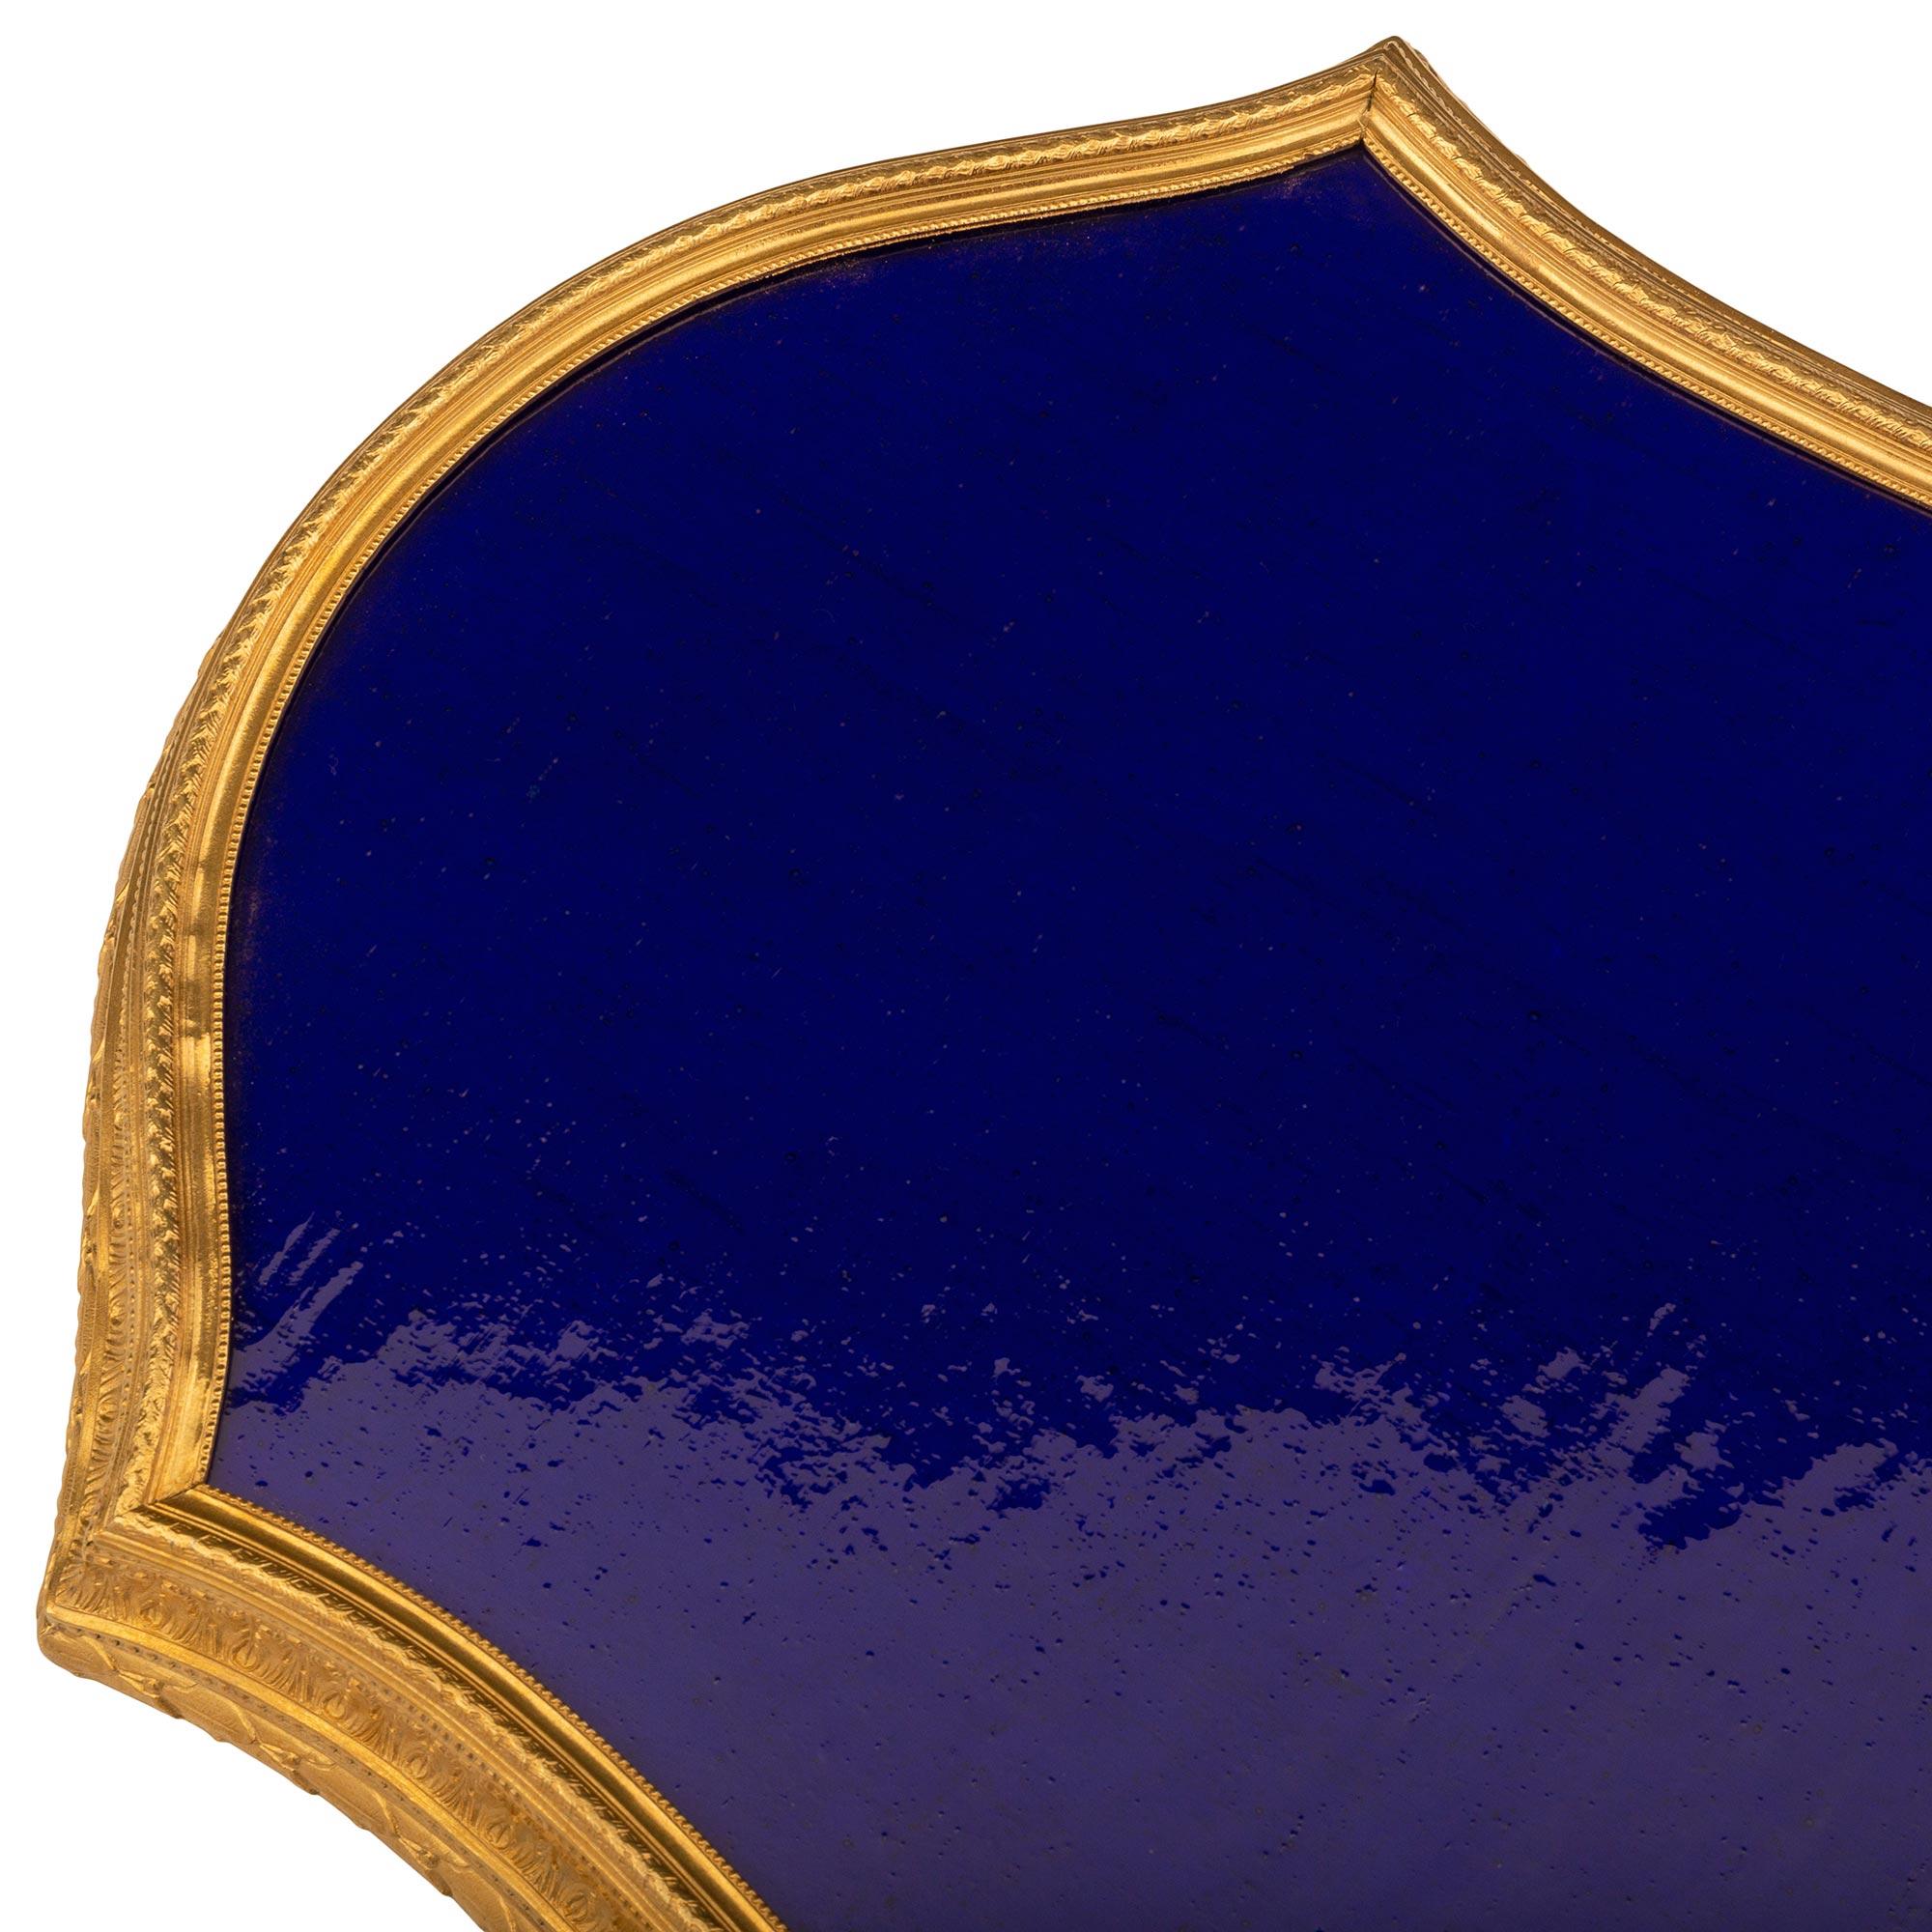 A striking and most elegant French 19th century Louis XVI st. ormolu and cobalt blue glass centerpiece plateau. The plateau is raised by a beautiful mottled ormolu band with a lovely scalloped shape and displaying richly chased berried laurel,